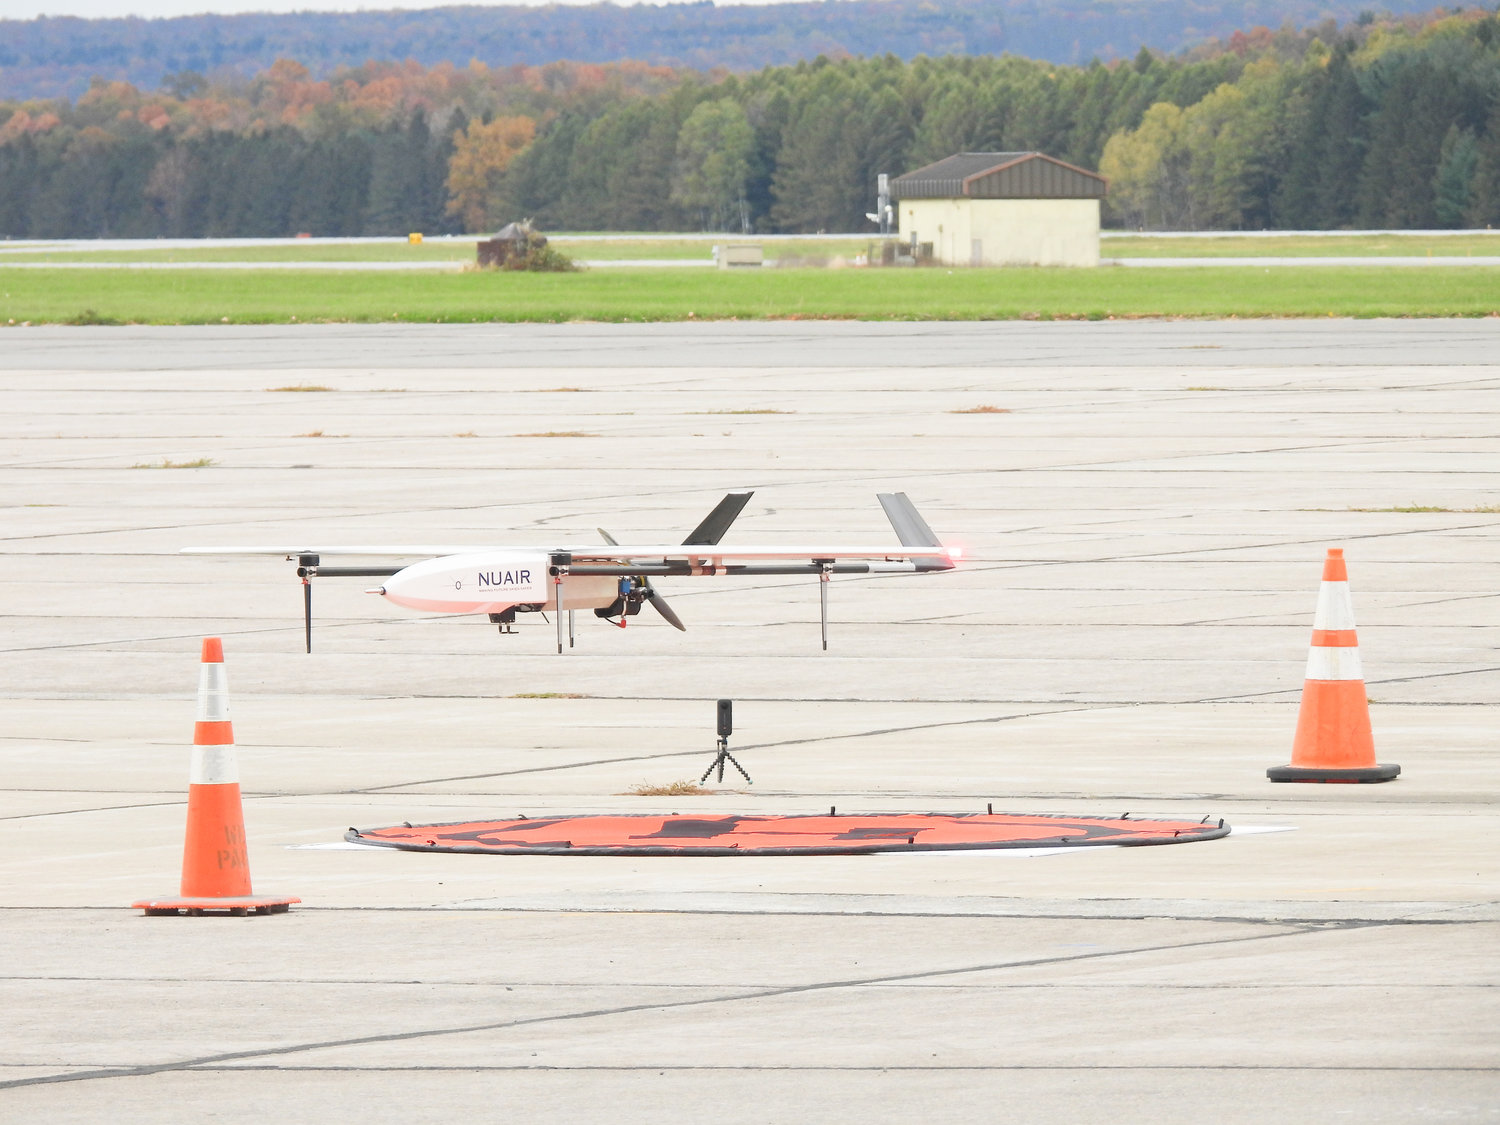 NUAIR’s Supervolo drone lands at Griffiss International Airport on Wednesday following a 50-mile journey from Syracuse to Rome without being in line of sight of a human operator, the first such flight following approval from the Federal Aviation Administration.